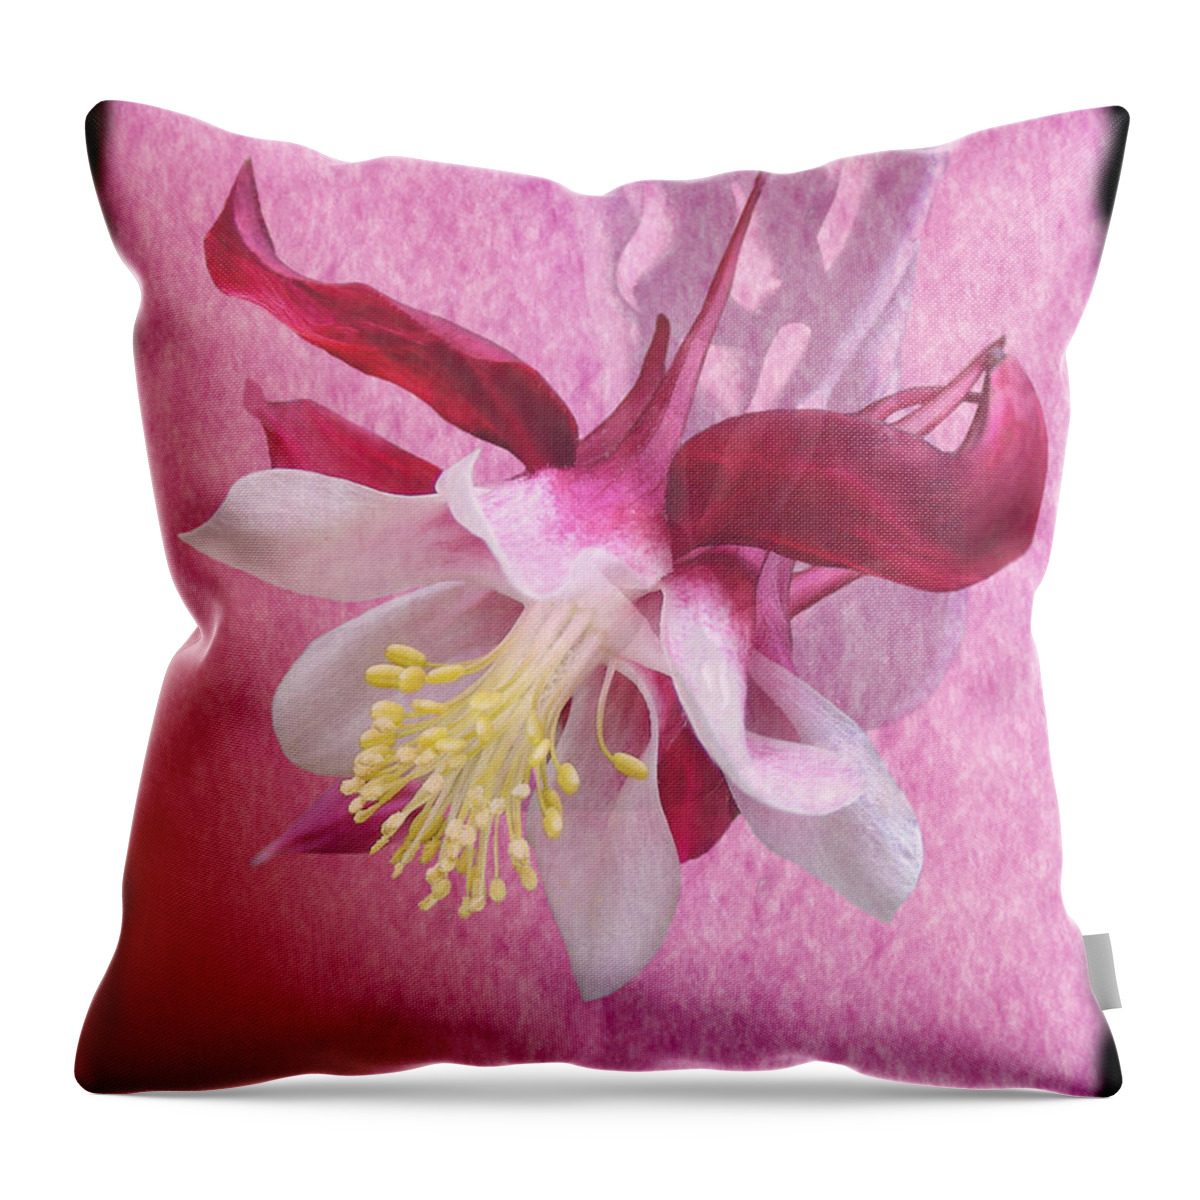 Fleurotica Art Throw Pillow featuring the digital art Pink Lady by Torie Tiffany